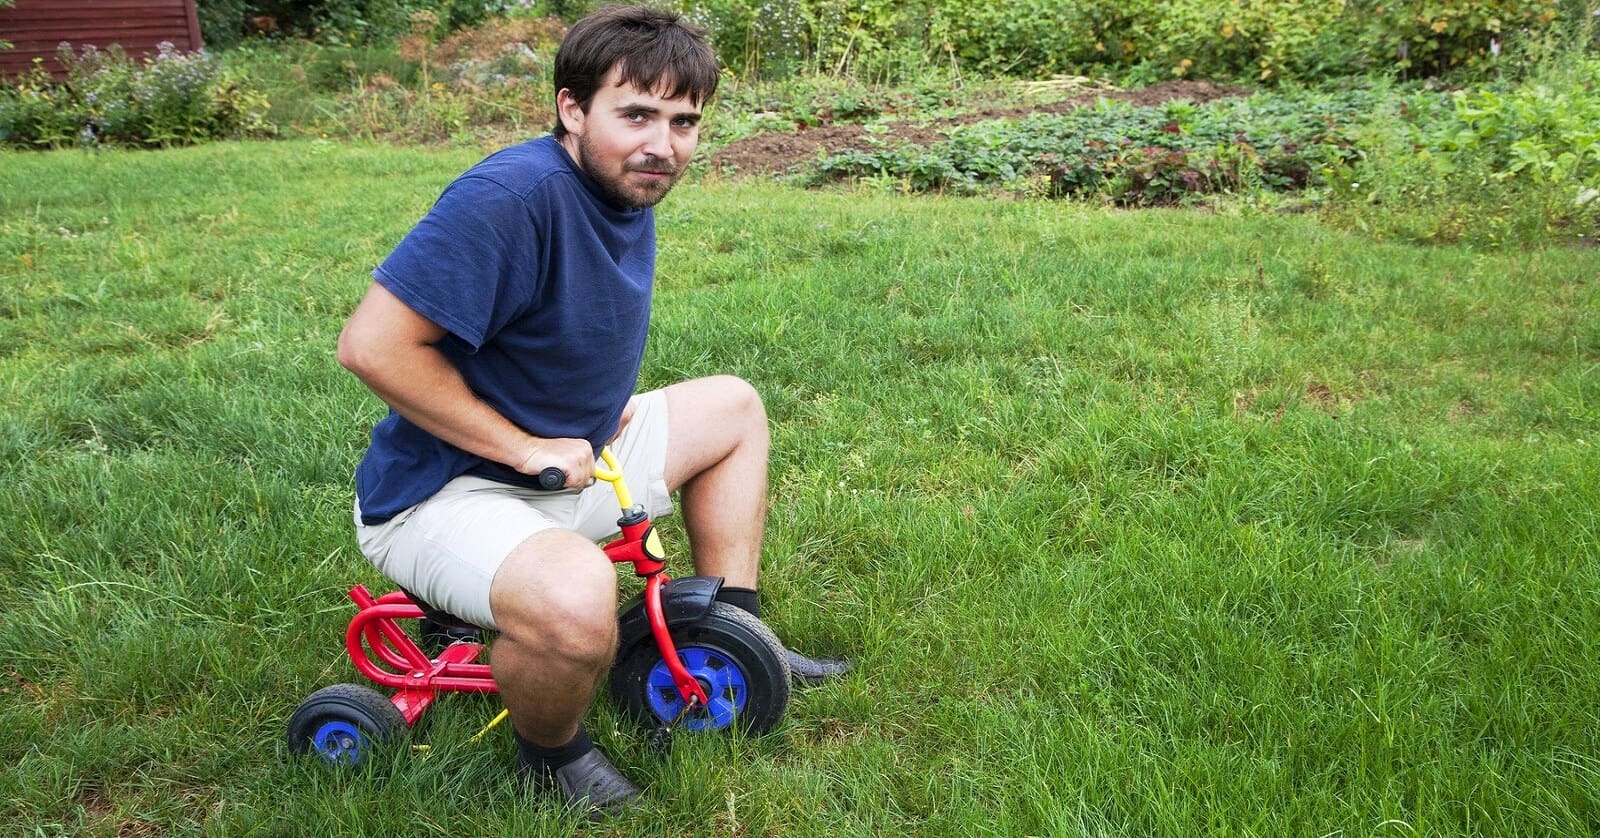 man trying to ride child's tricycle who needs to stop being childish